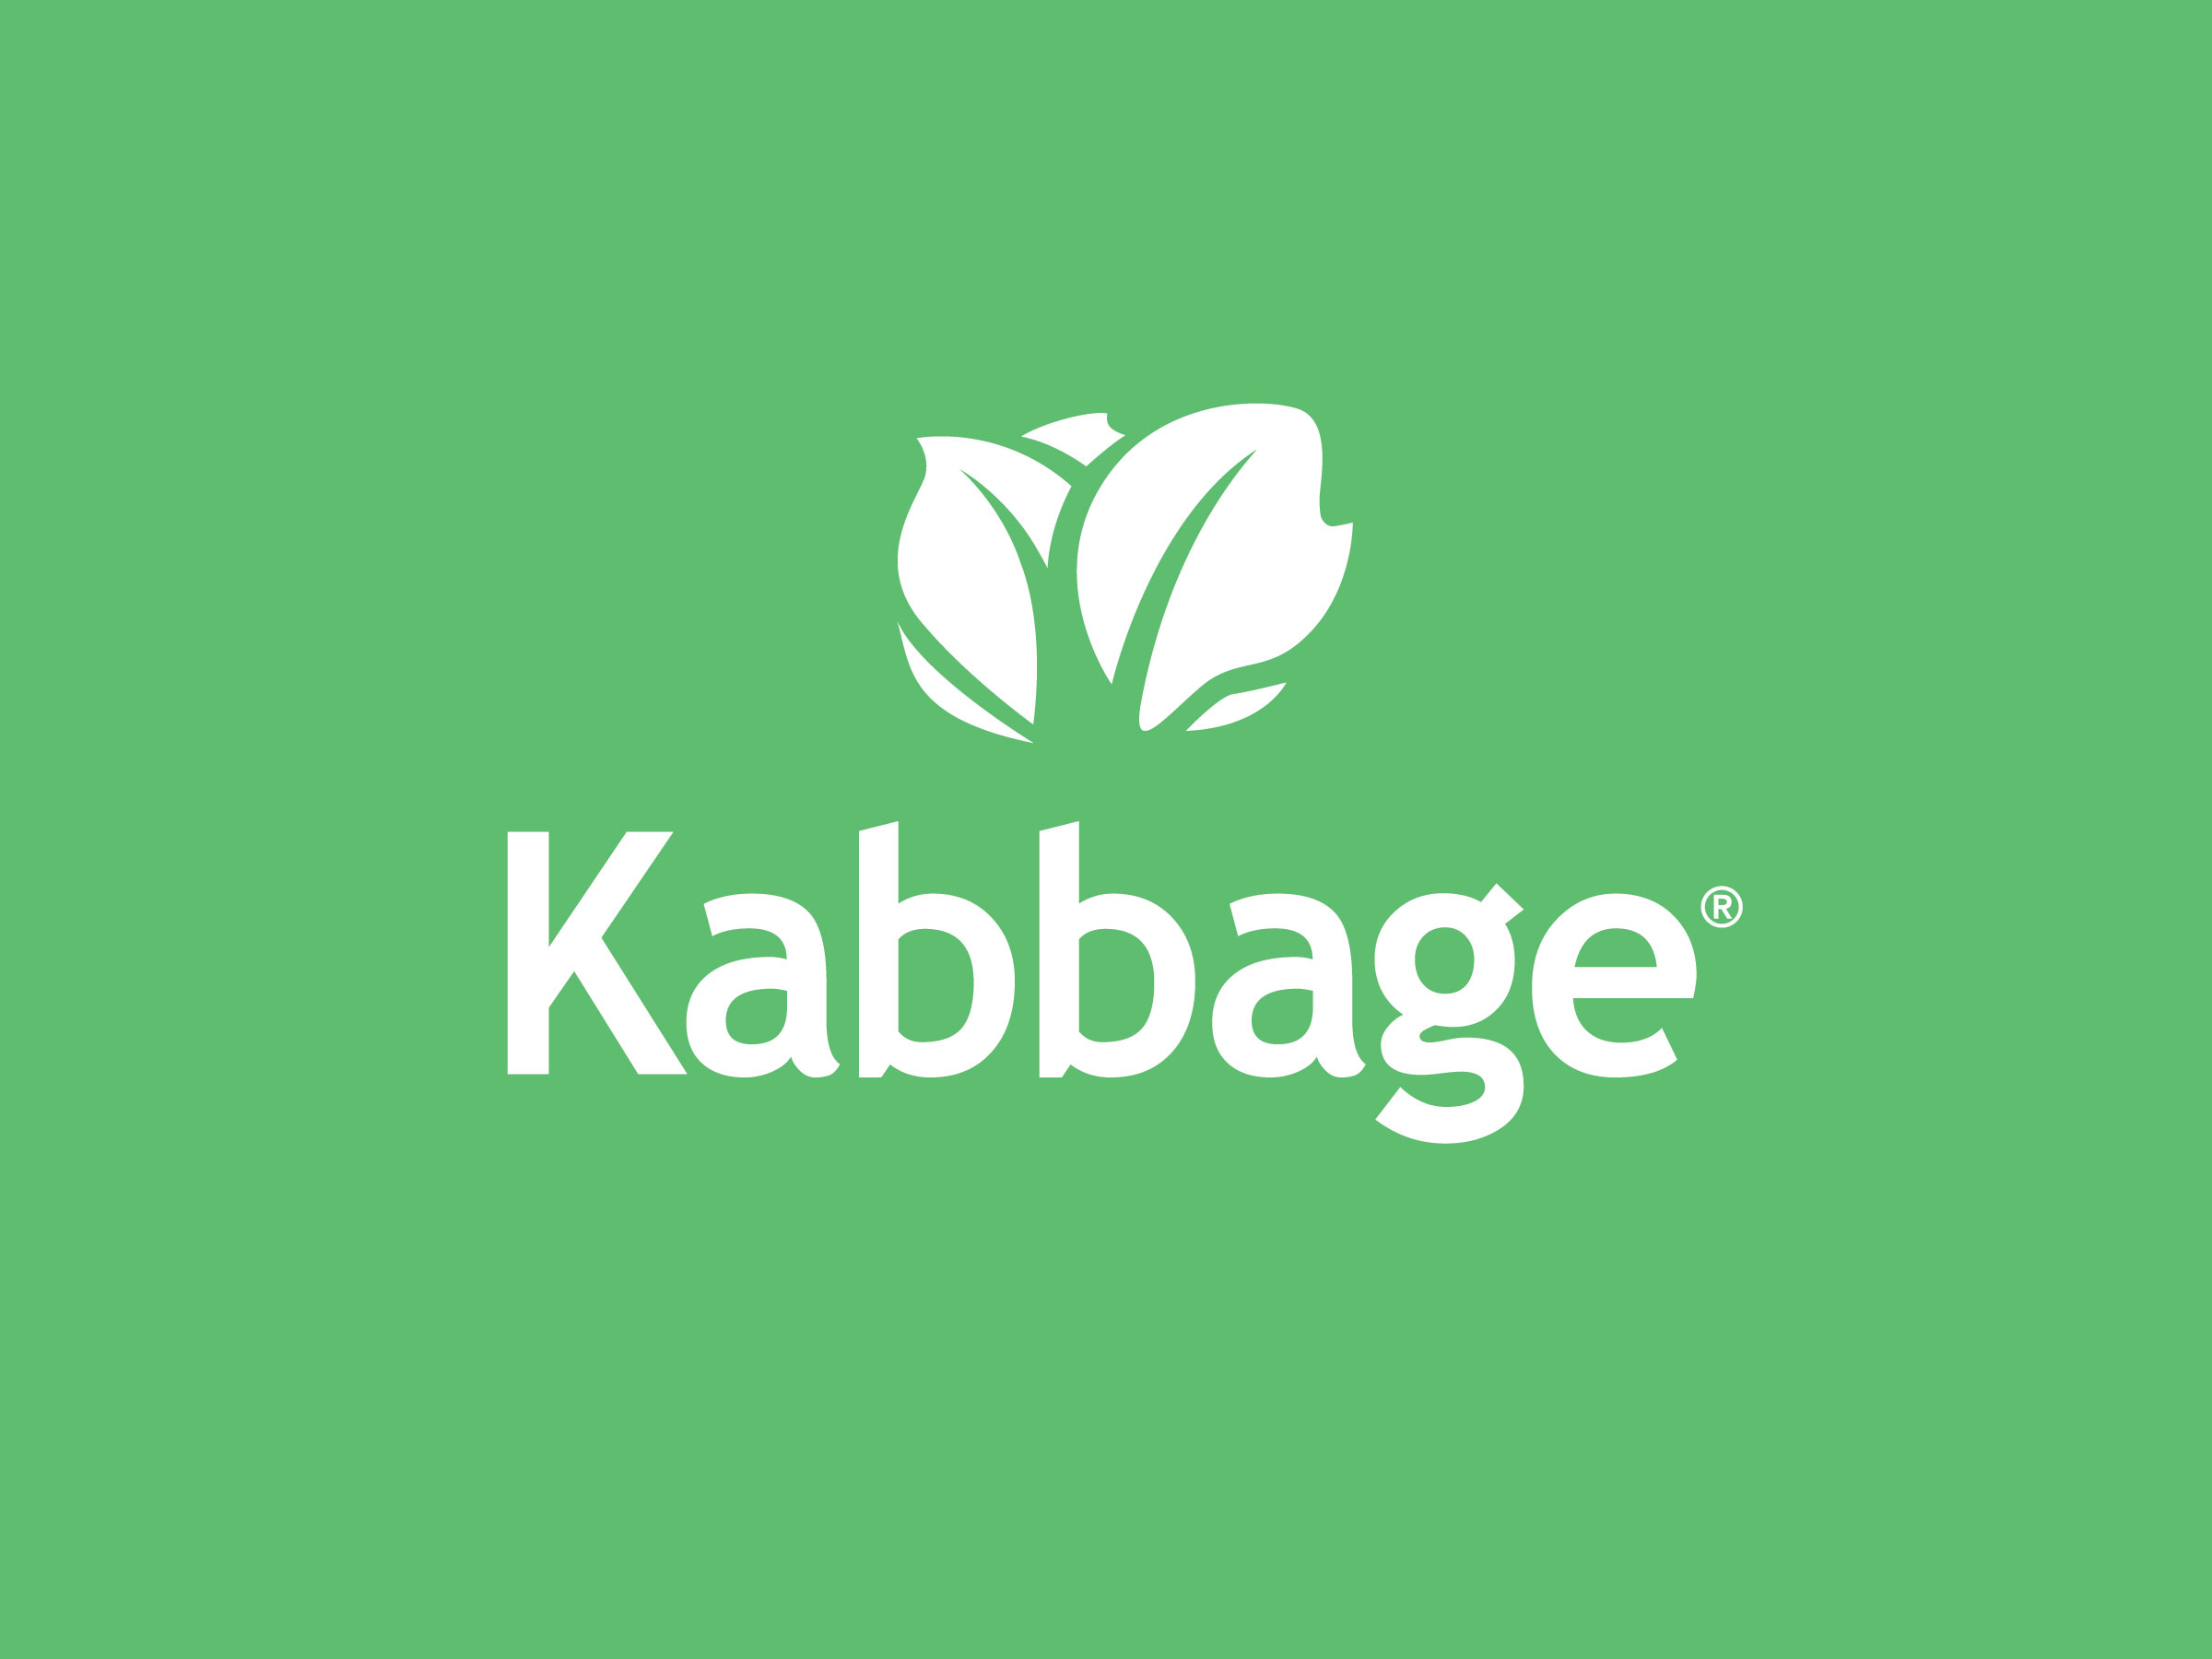 Kabbage Newsroom Kabbage Raises $135 Million Series E Funding Round Led by  Reverence Capital Partners, ING, Santander InnoVentures, and Scotiabank;  Expands Credit Facility to $900 Million | Kabbage Newsroom